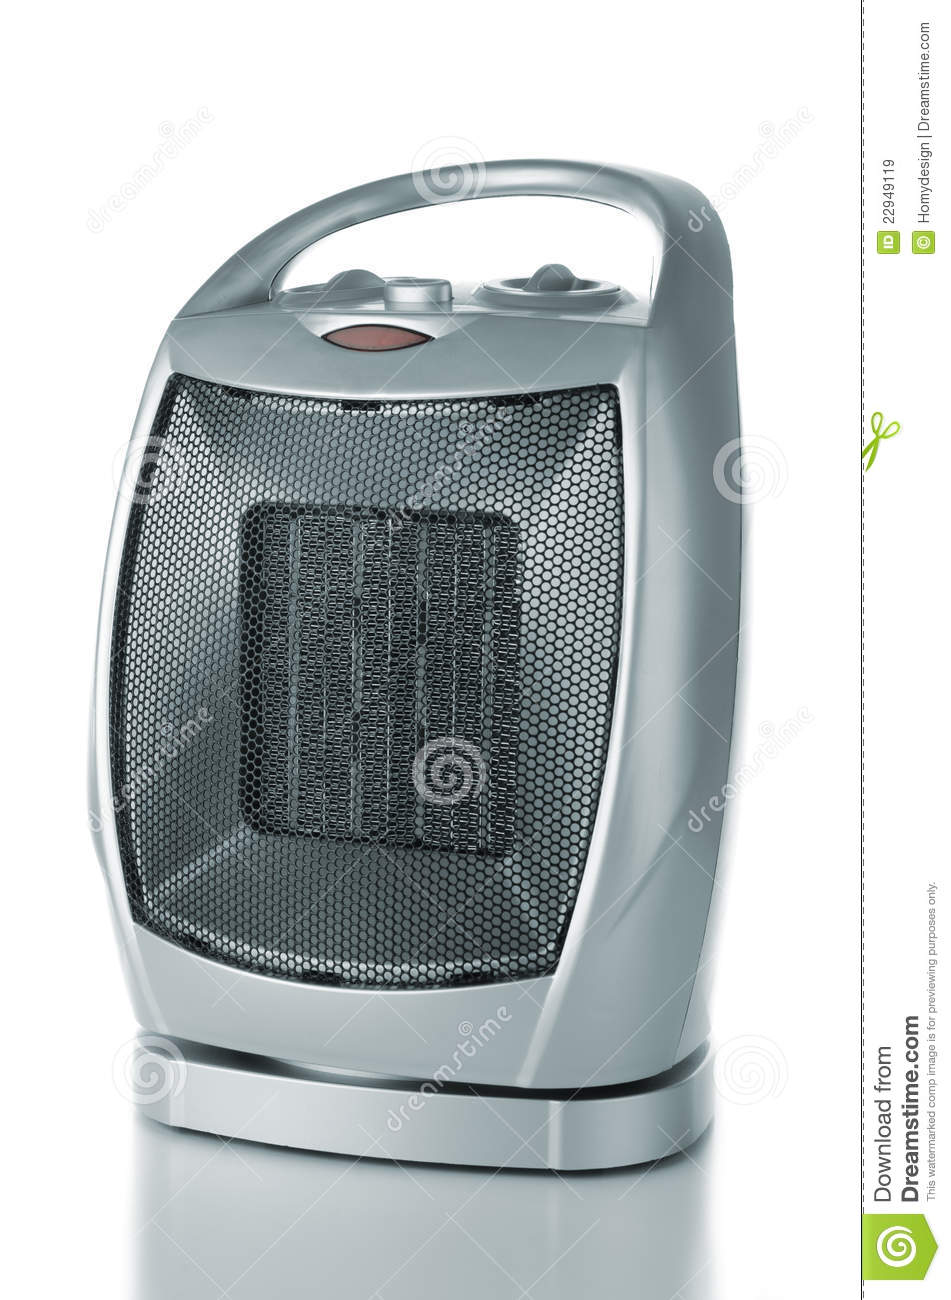 Portable Electric Heater Royalty Free Stock Images   Image  22949119